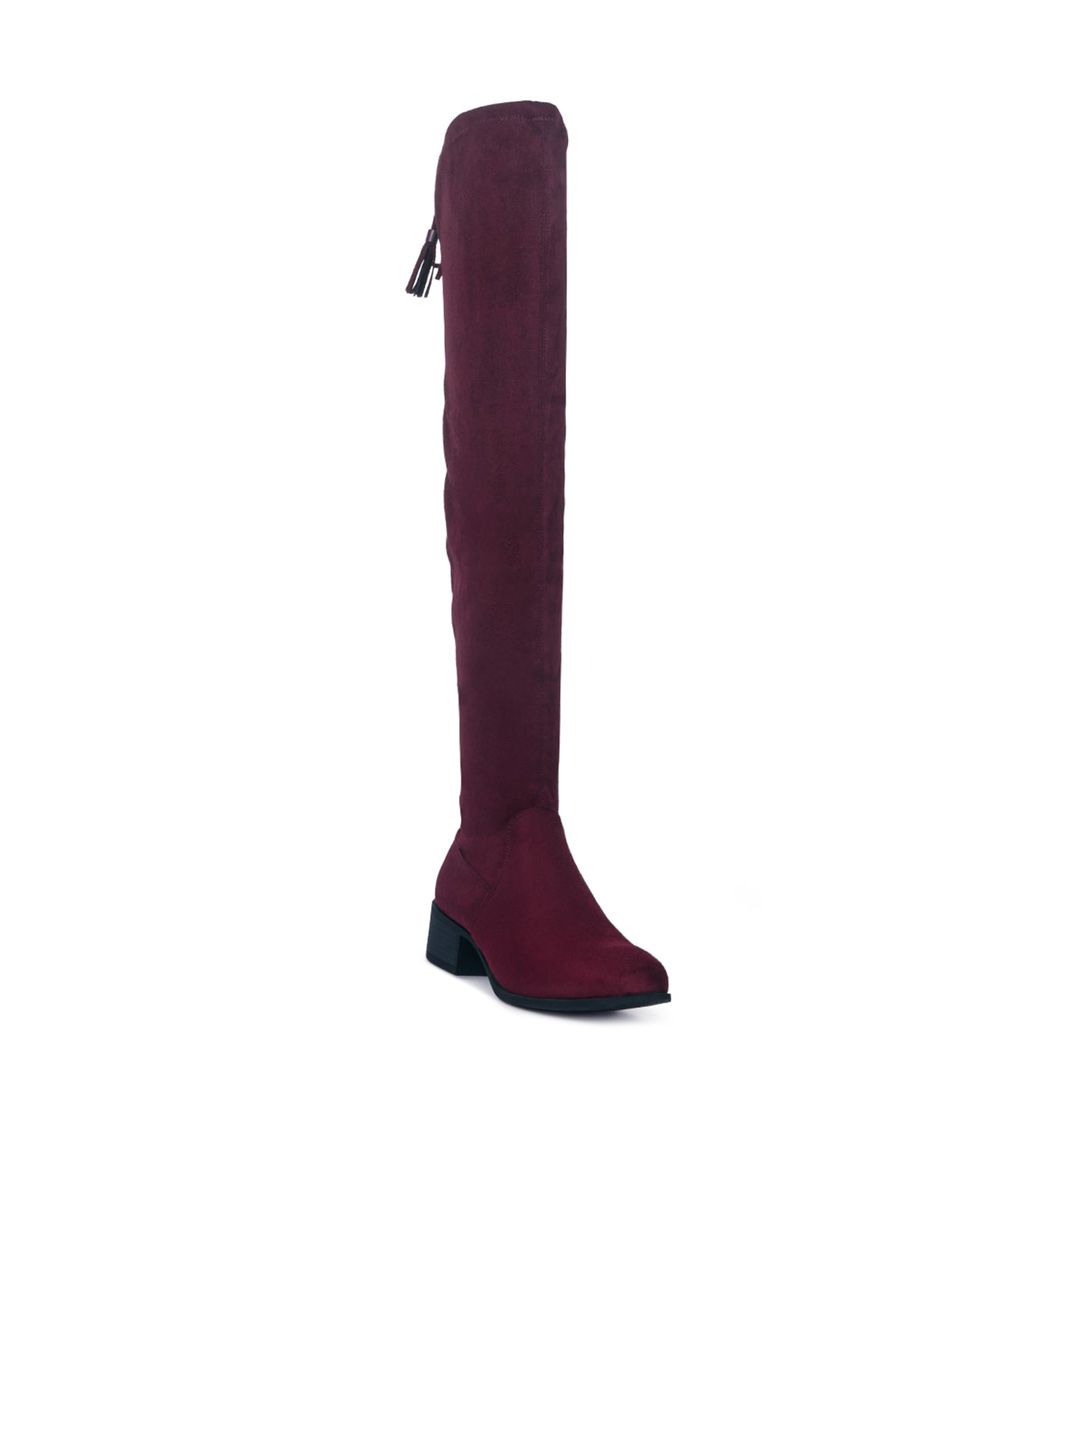 London Rag Burgundy Leather High-Top Block Heeled Boots Price in India